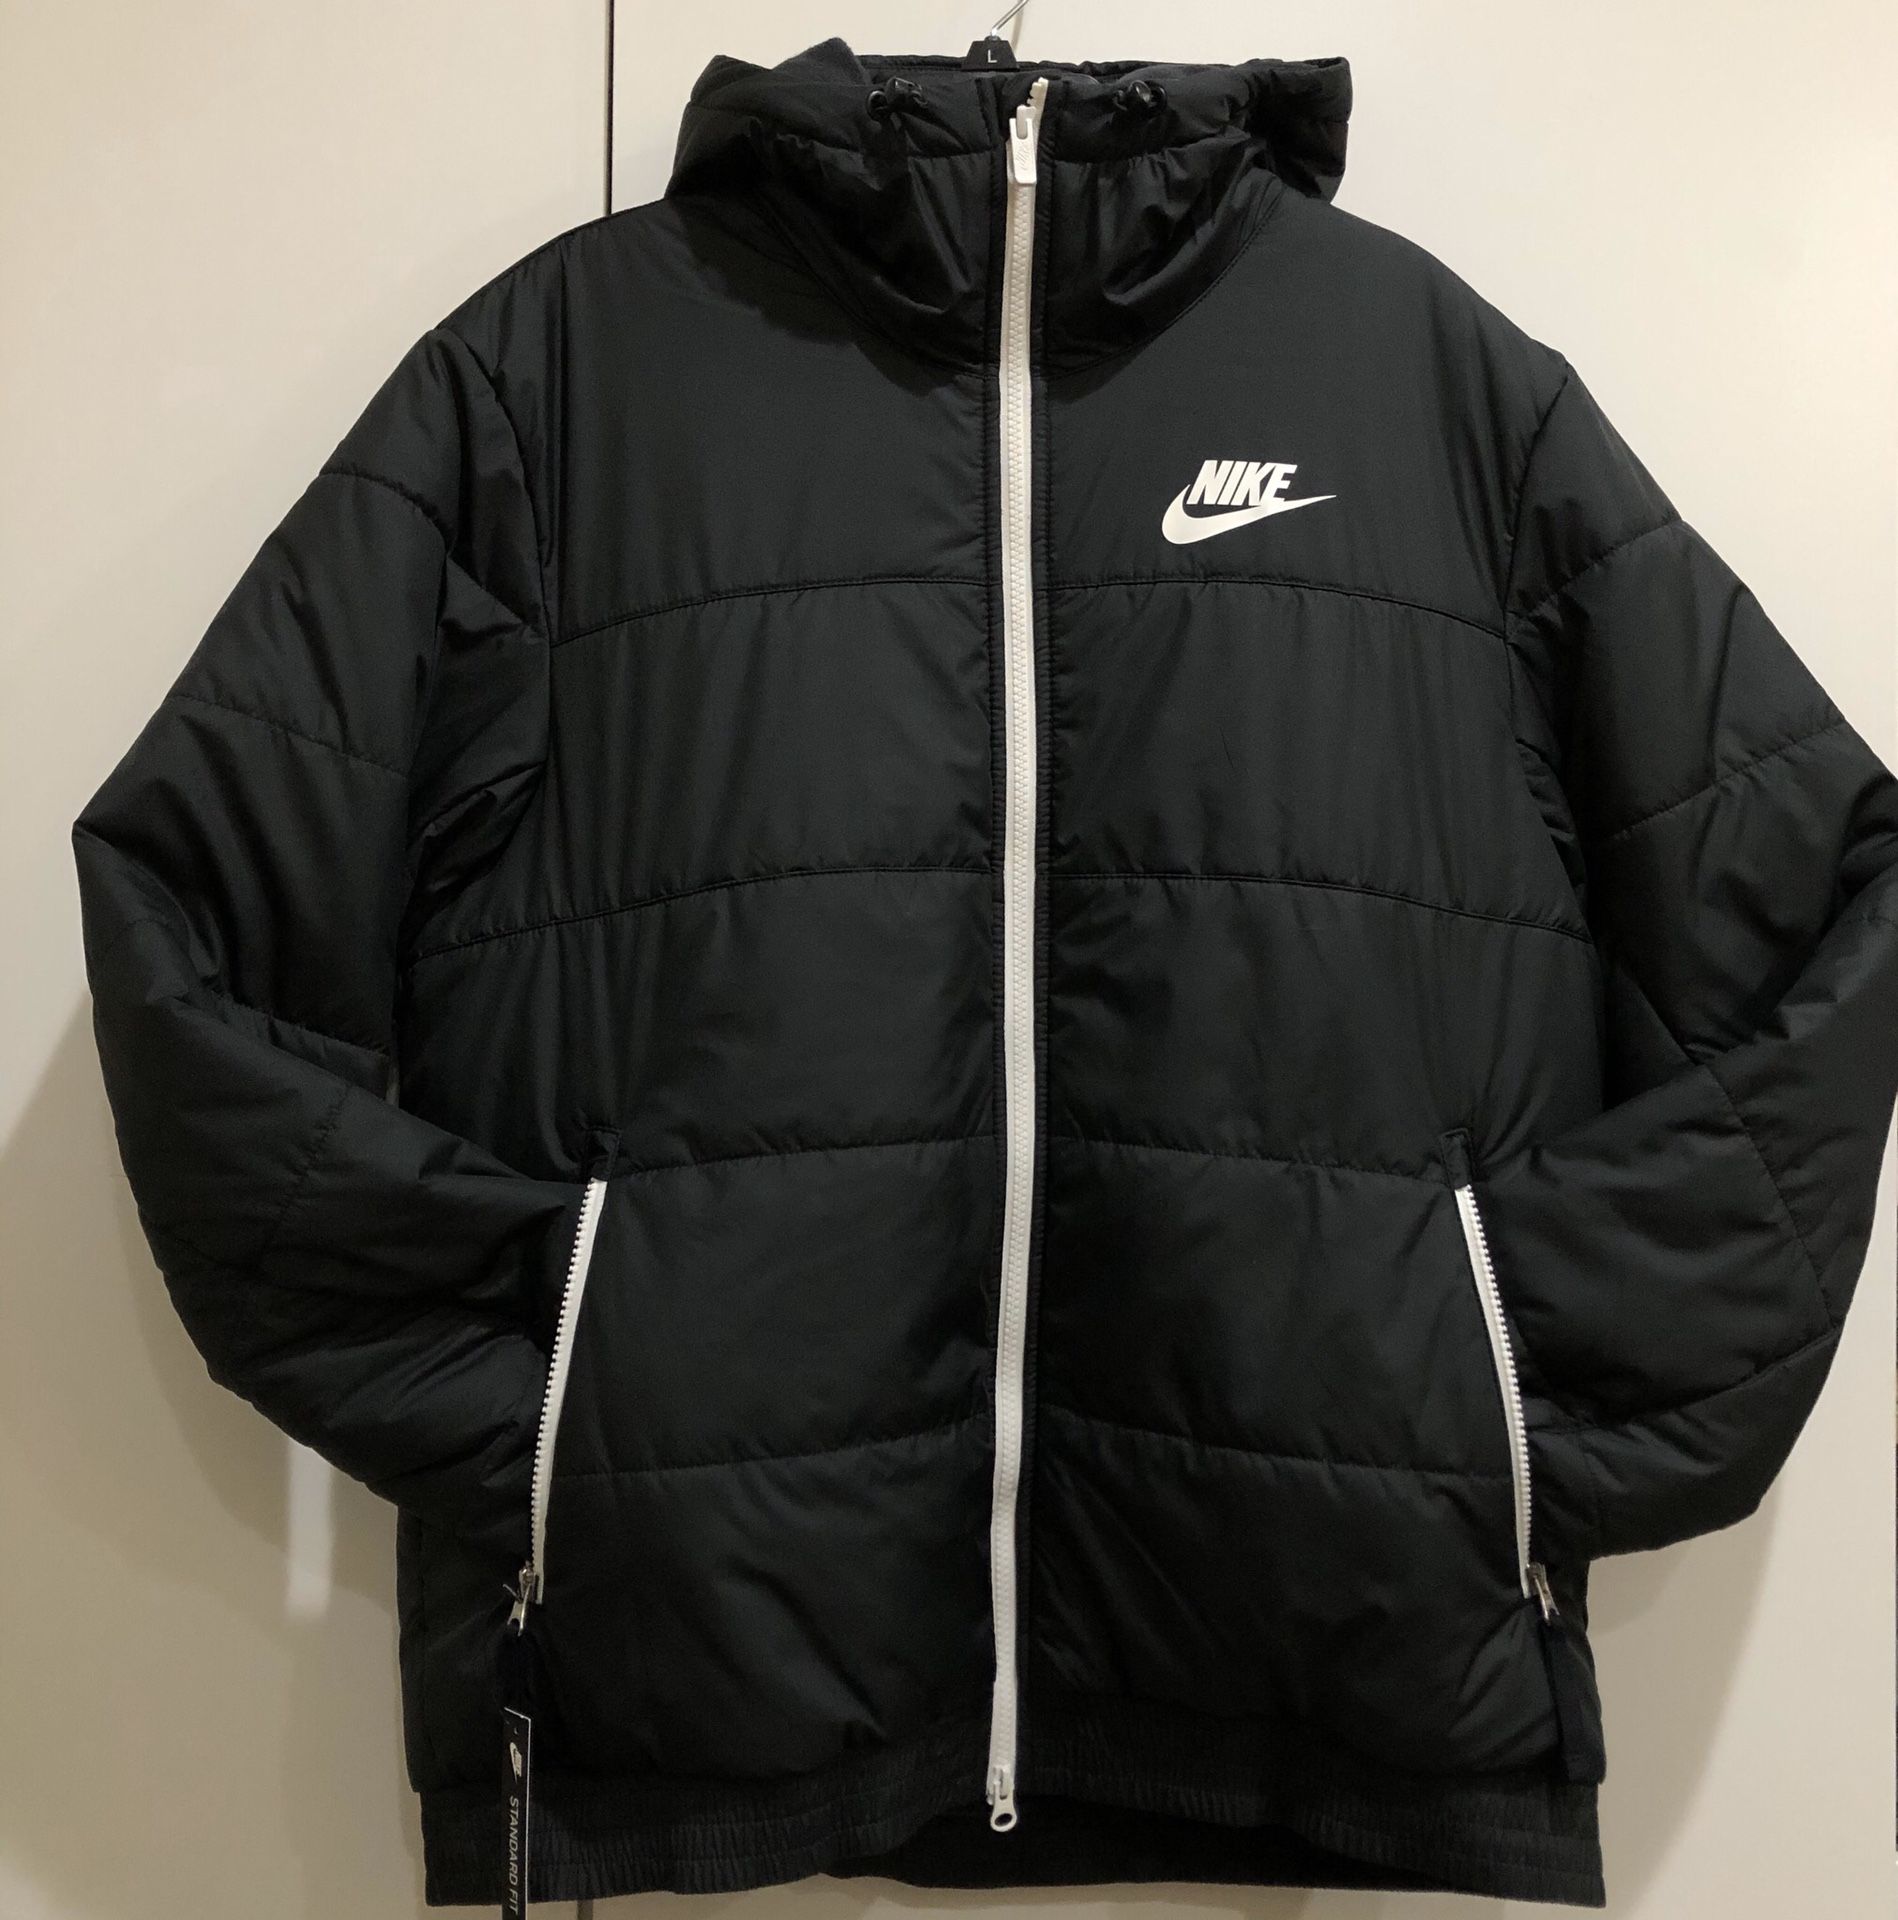 Nike Mens PUffer jacket ONLY size L or XL